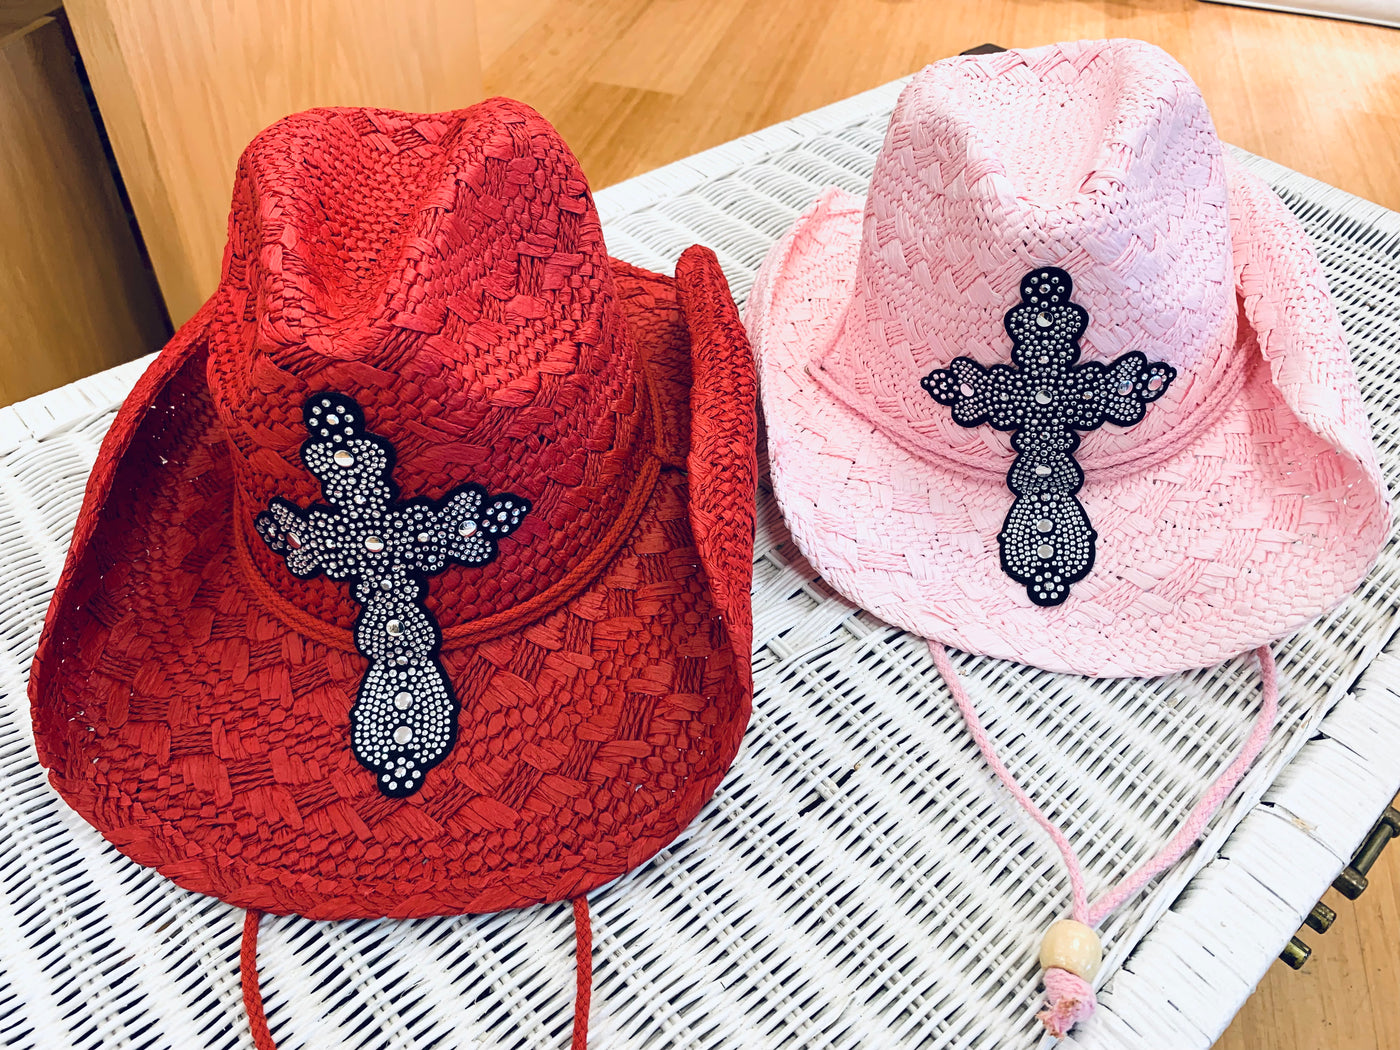 Bling Cross Cowgirl Hat (2 colors)